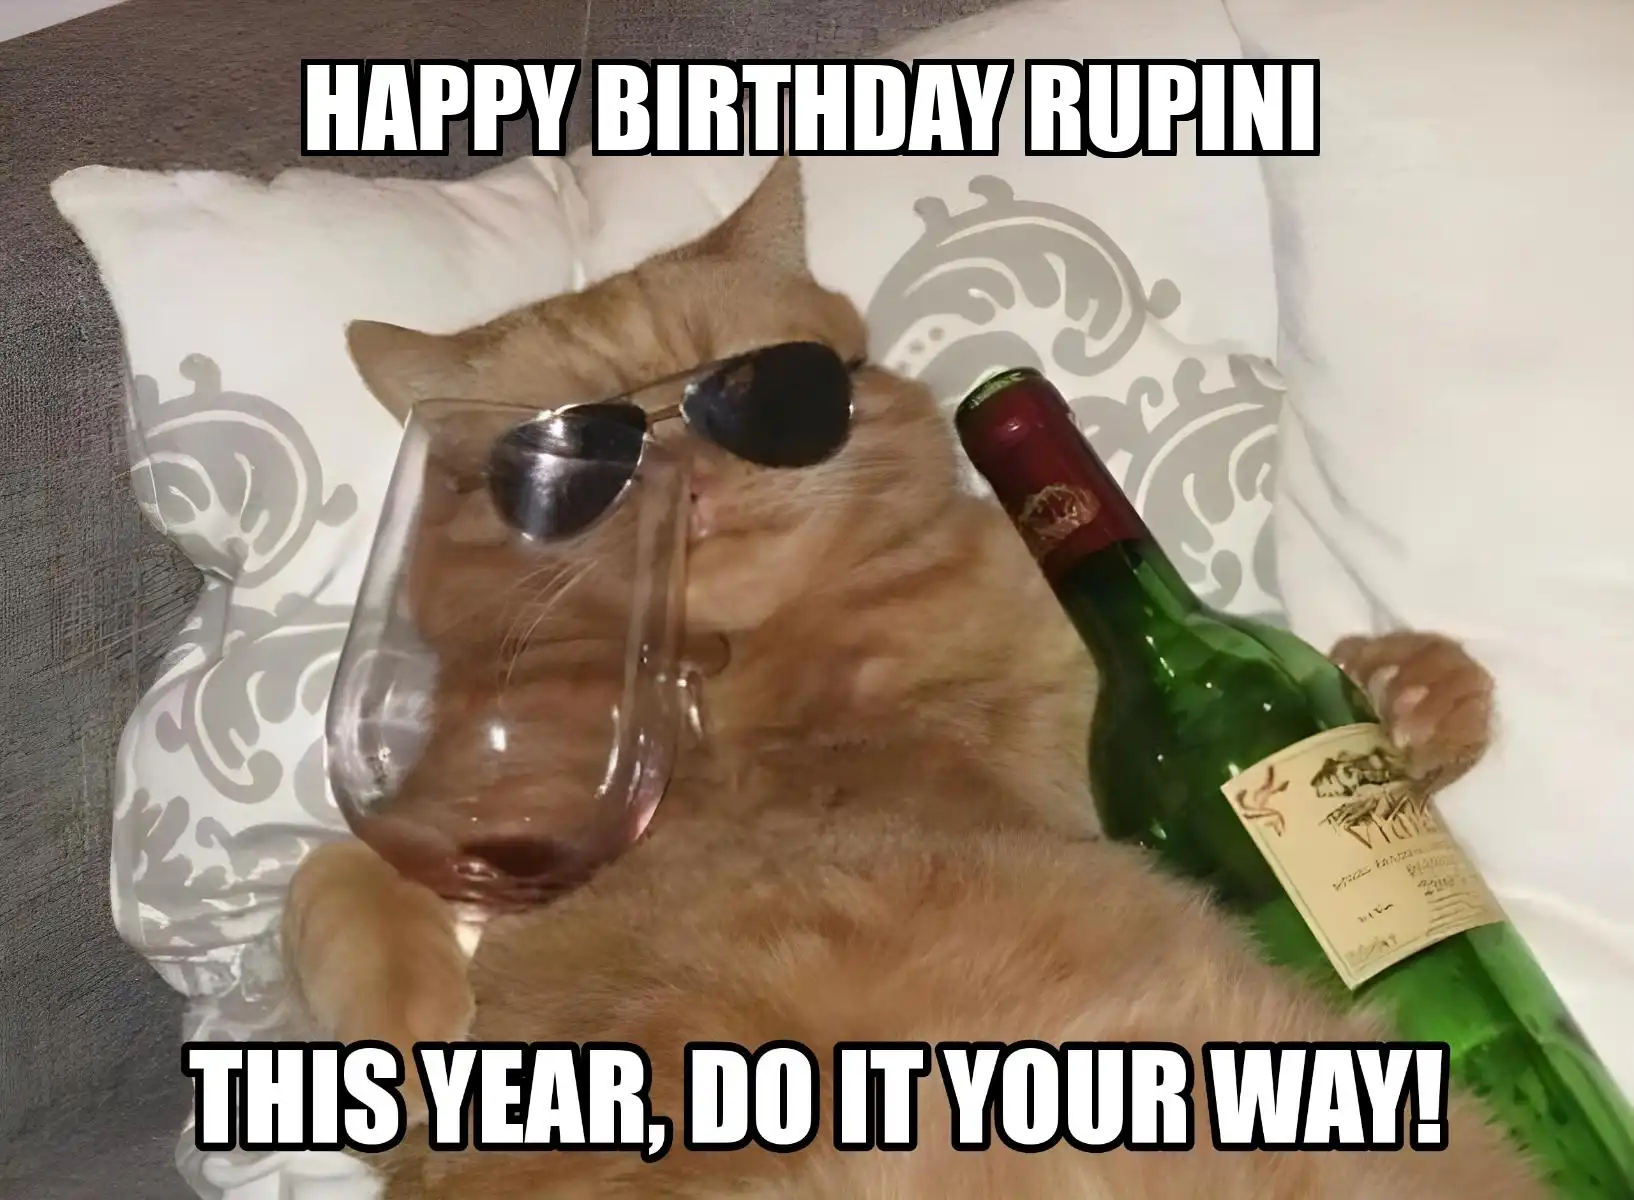 Happy Birthday Rupini This Year Do It Your Way Meme